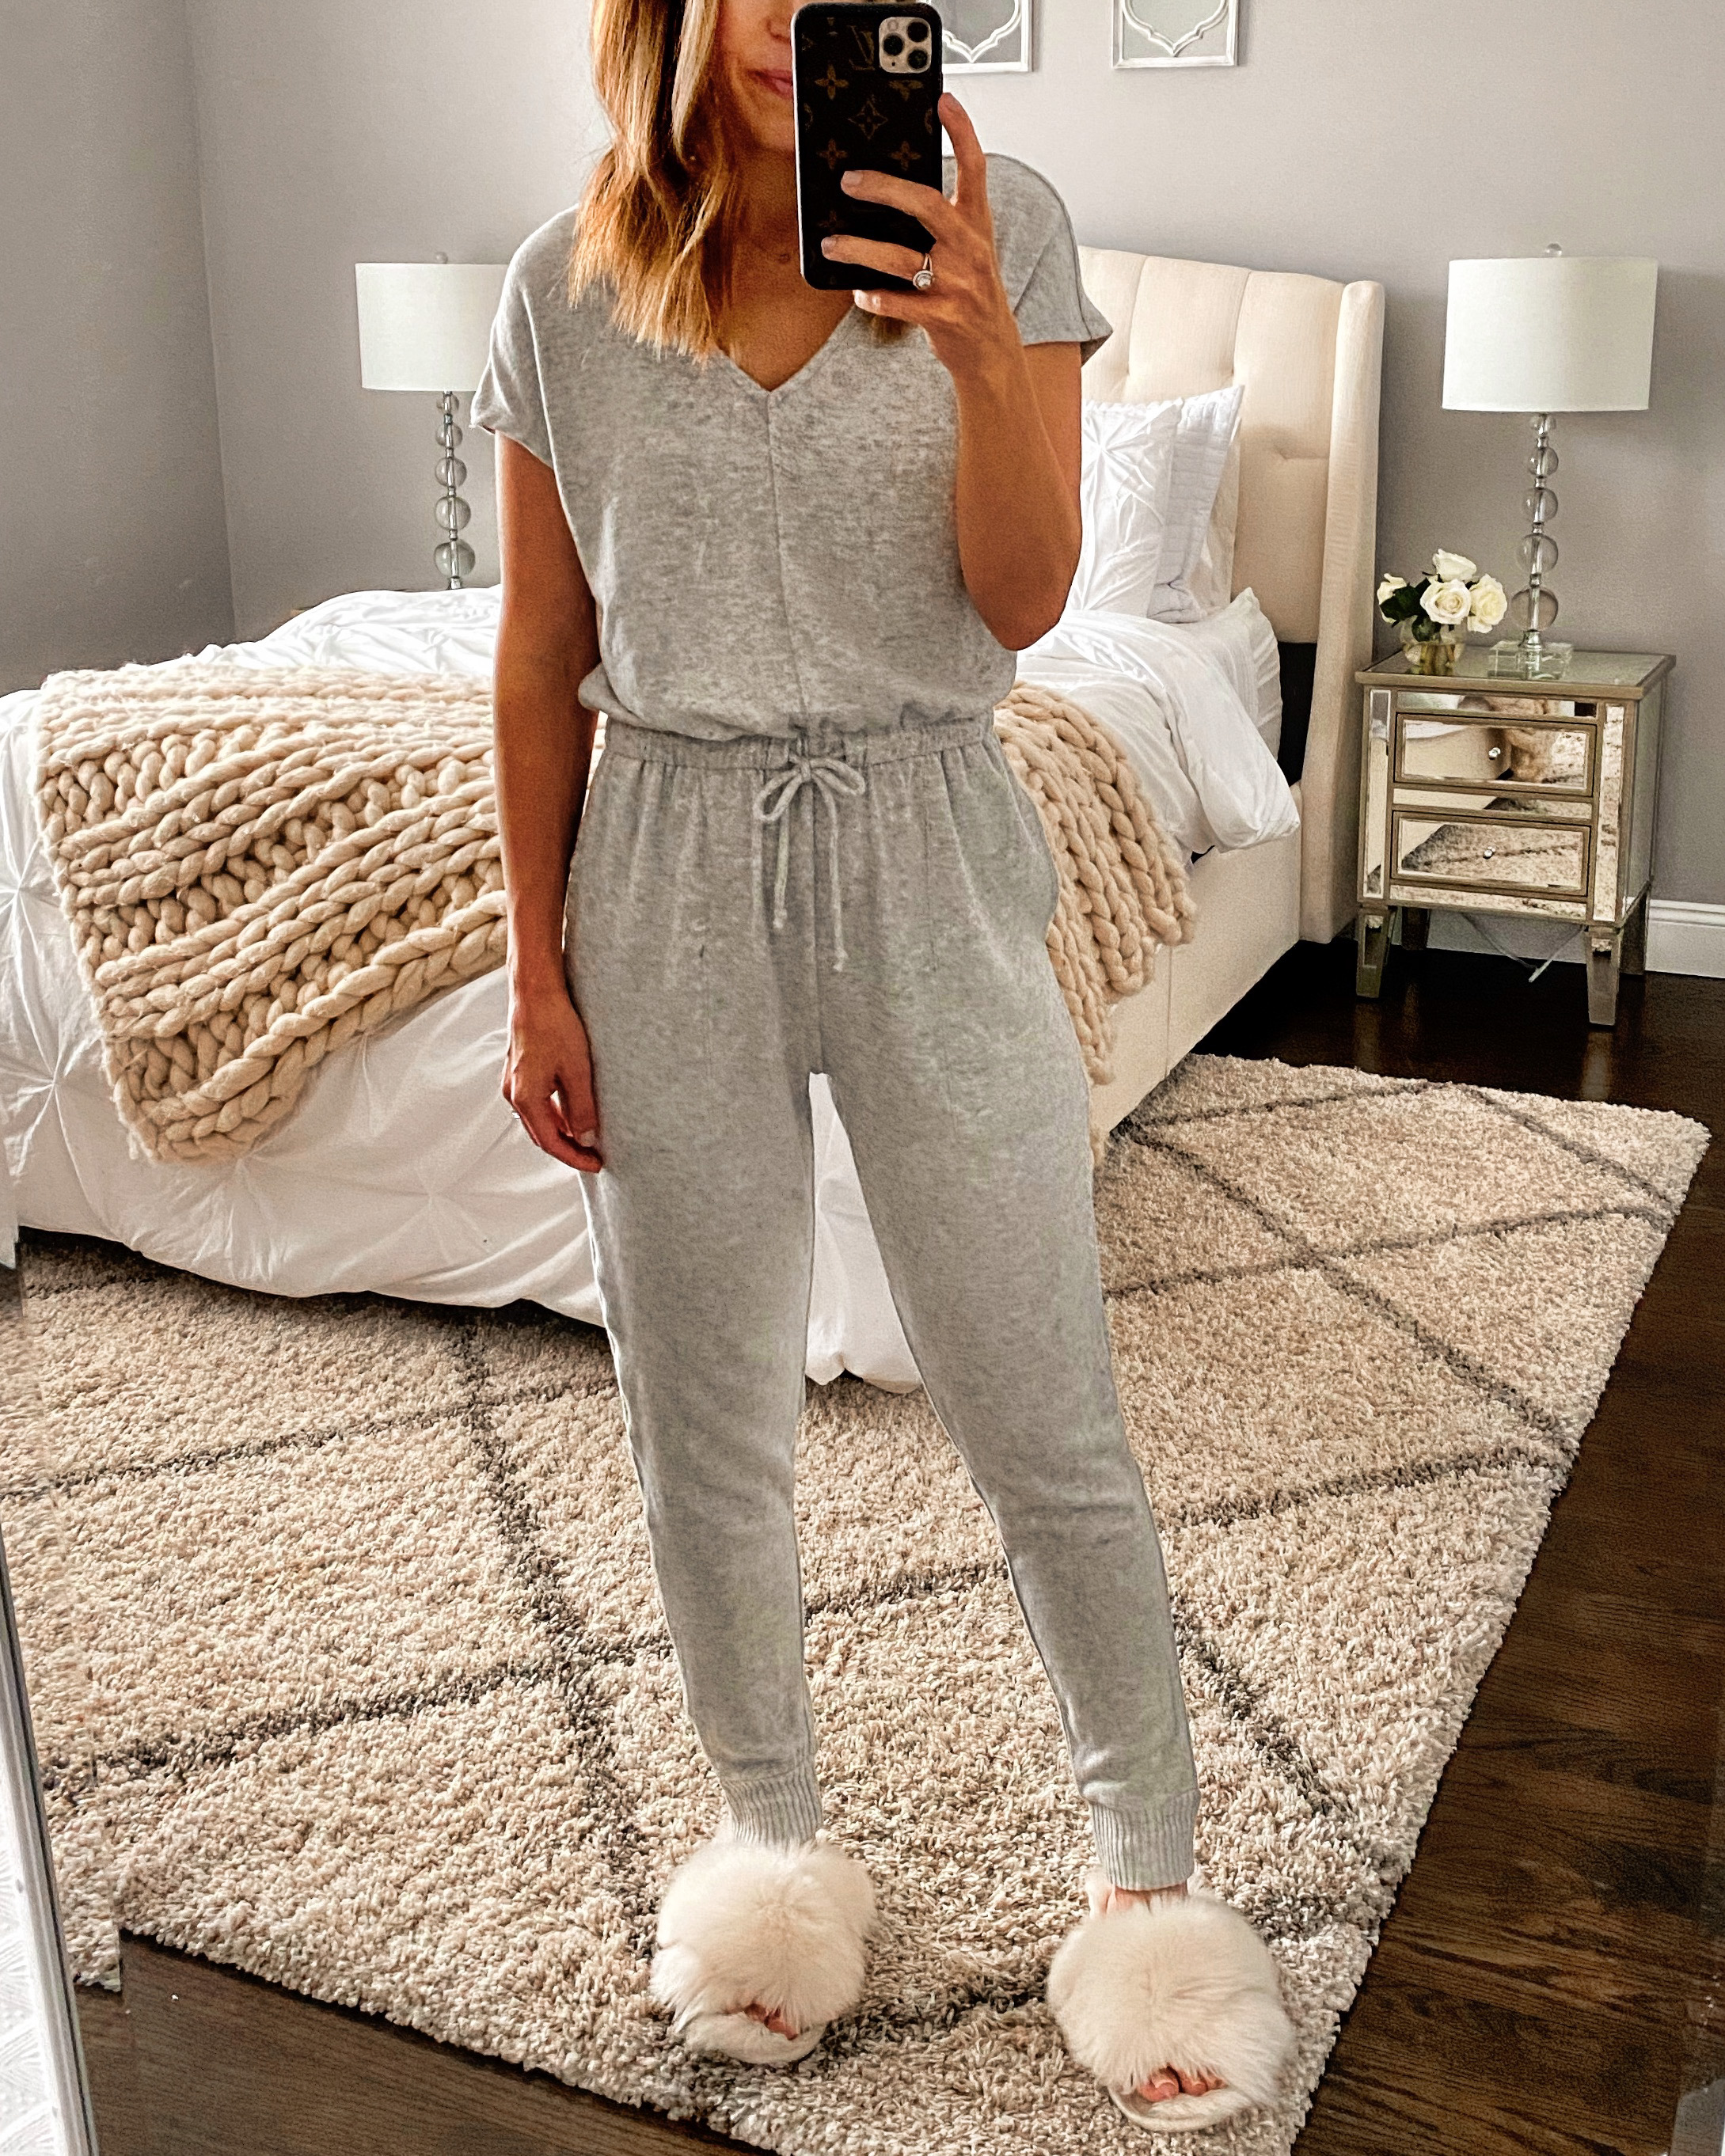 Loungewear I'm Loving from Target - This is our Bliss